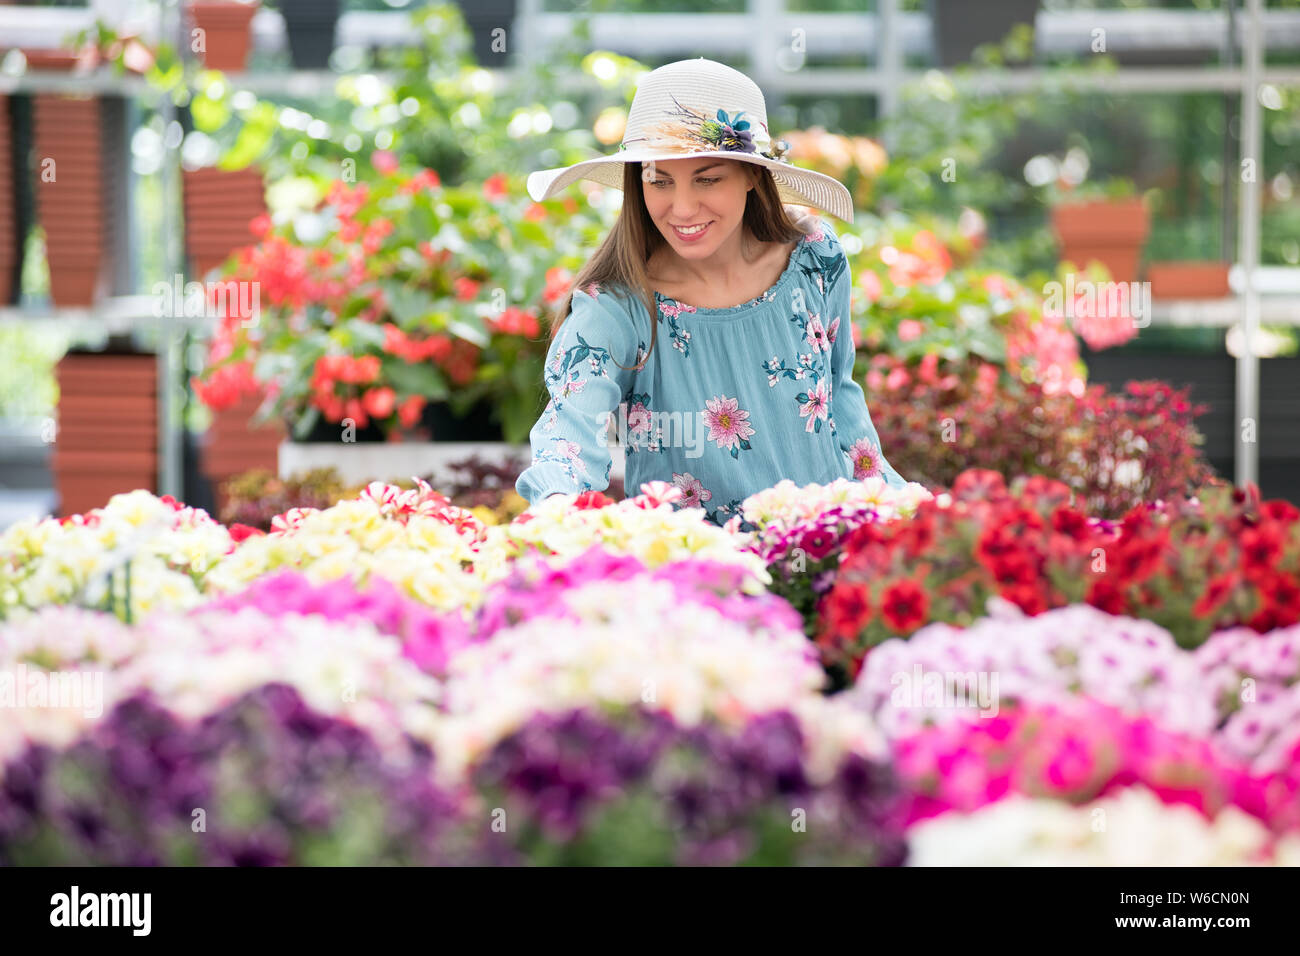 Young woman in sunhat buying colorful flowering summer plants at a nursery making a selection from a large array on display Stock Photo